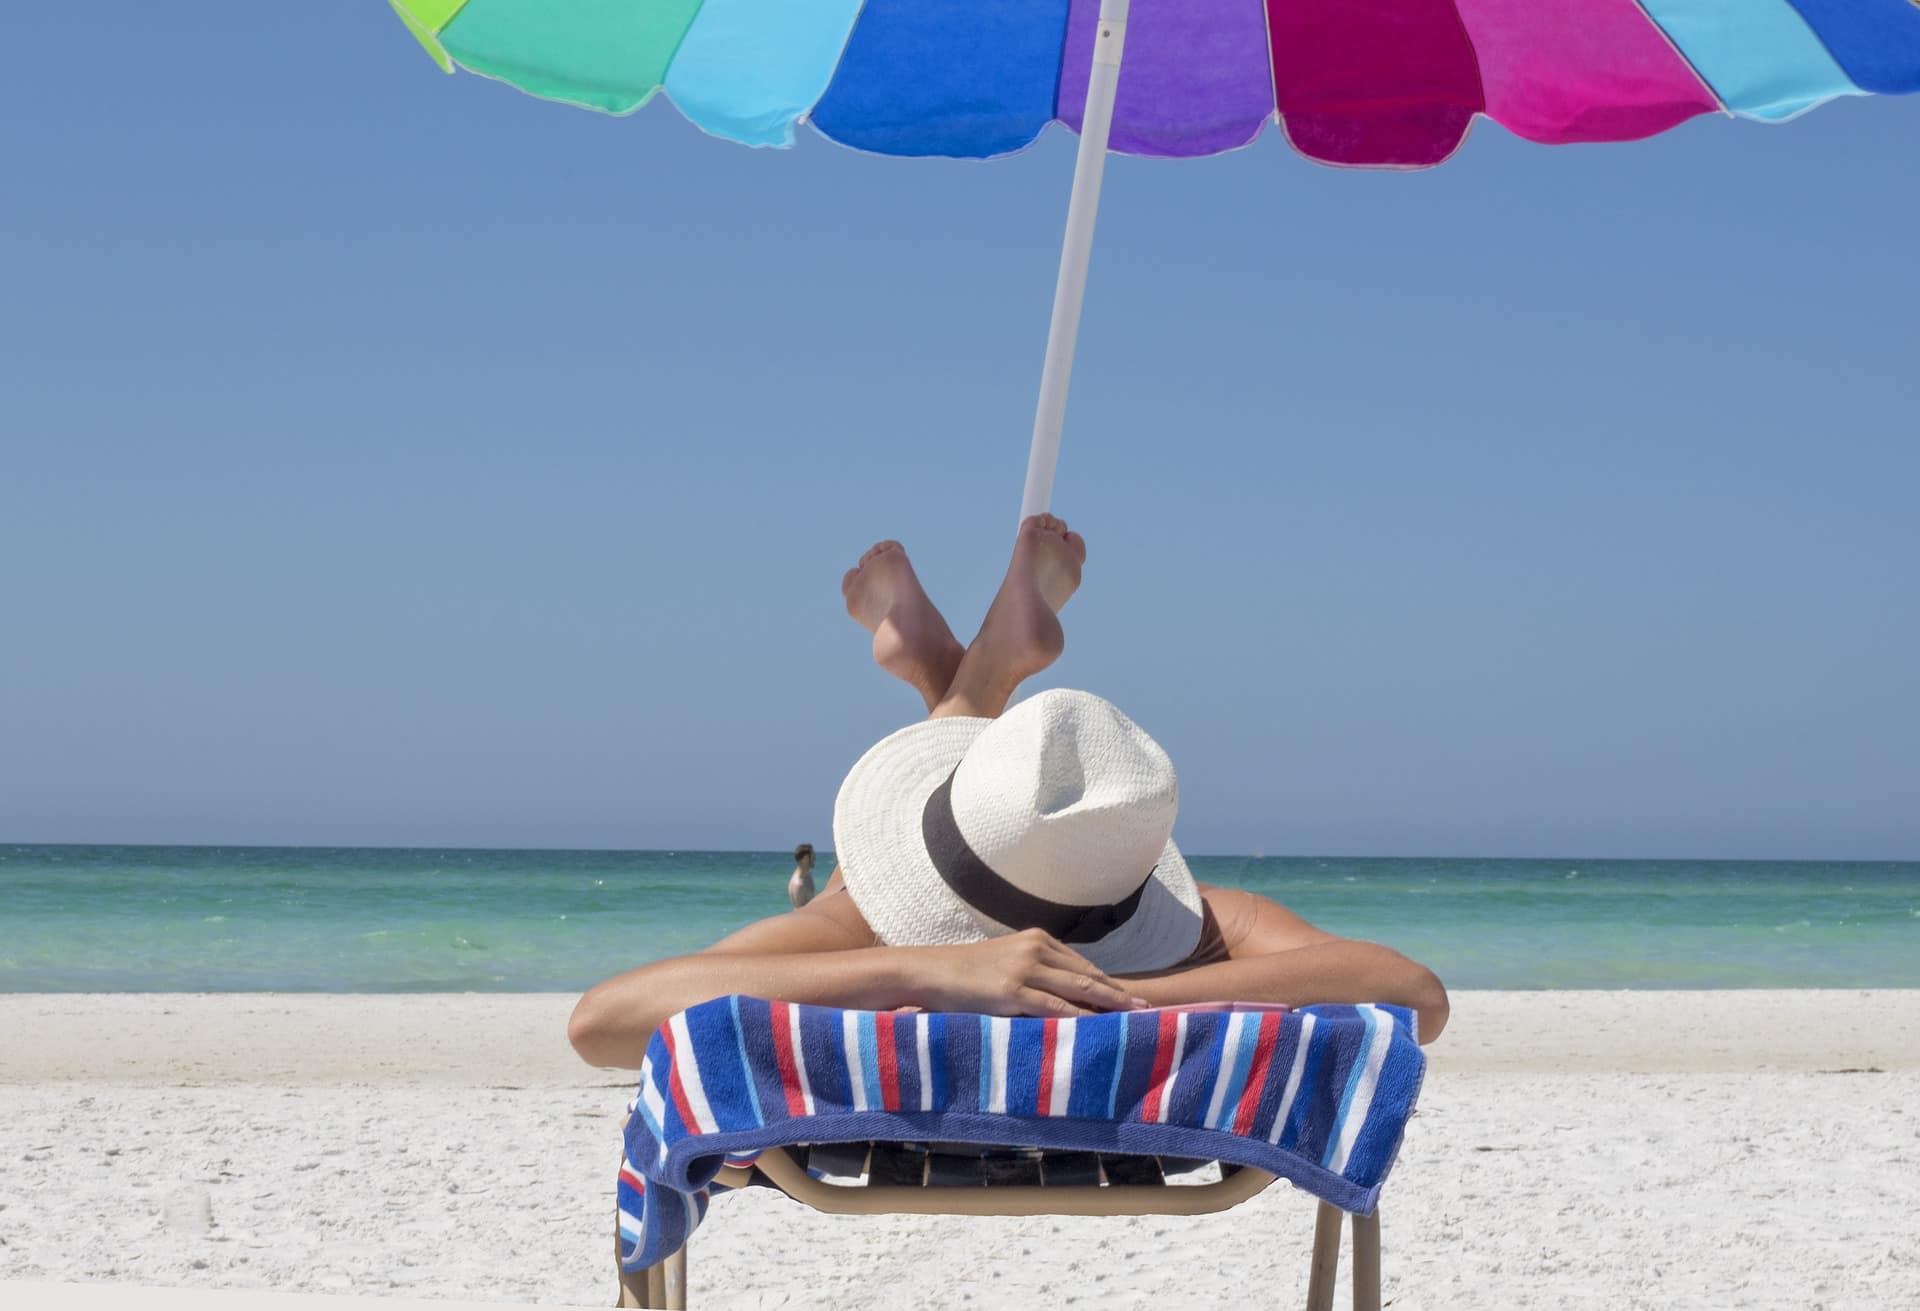 Stock image - Woman on beach holiday summer vacation with umbrella